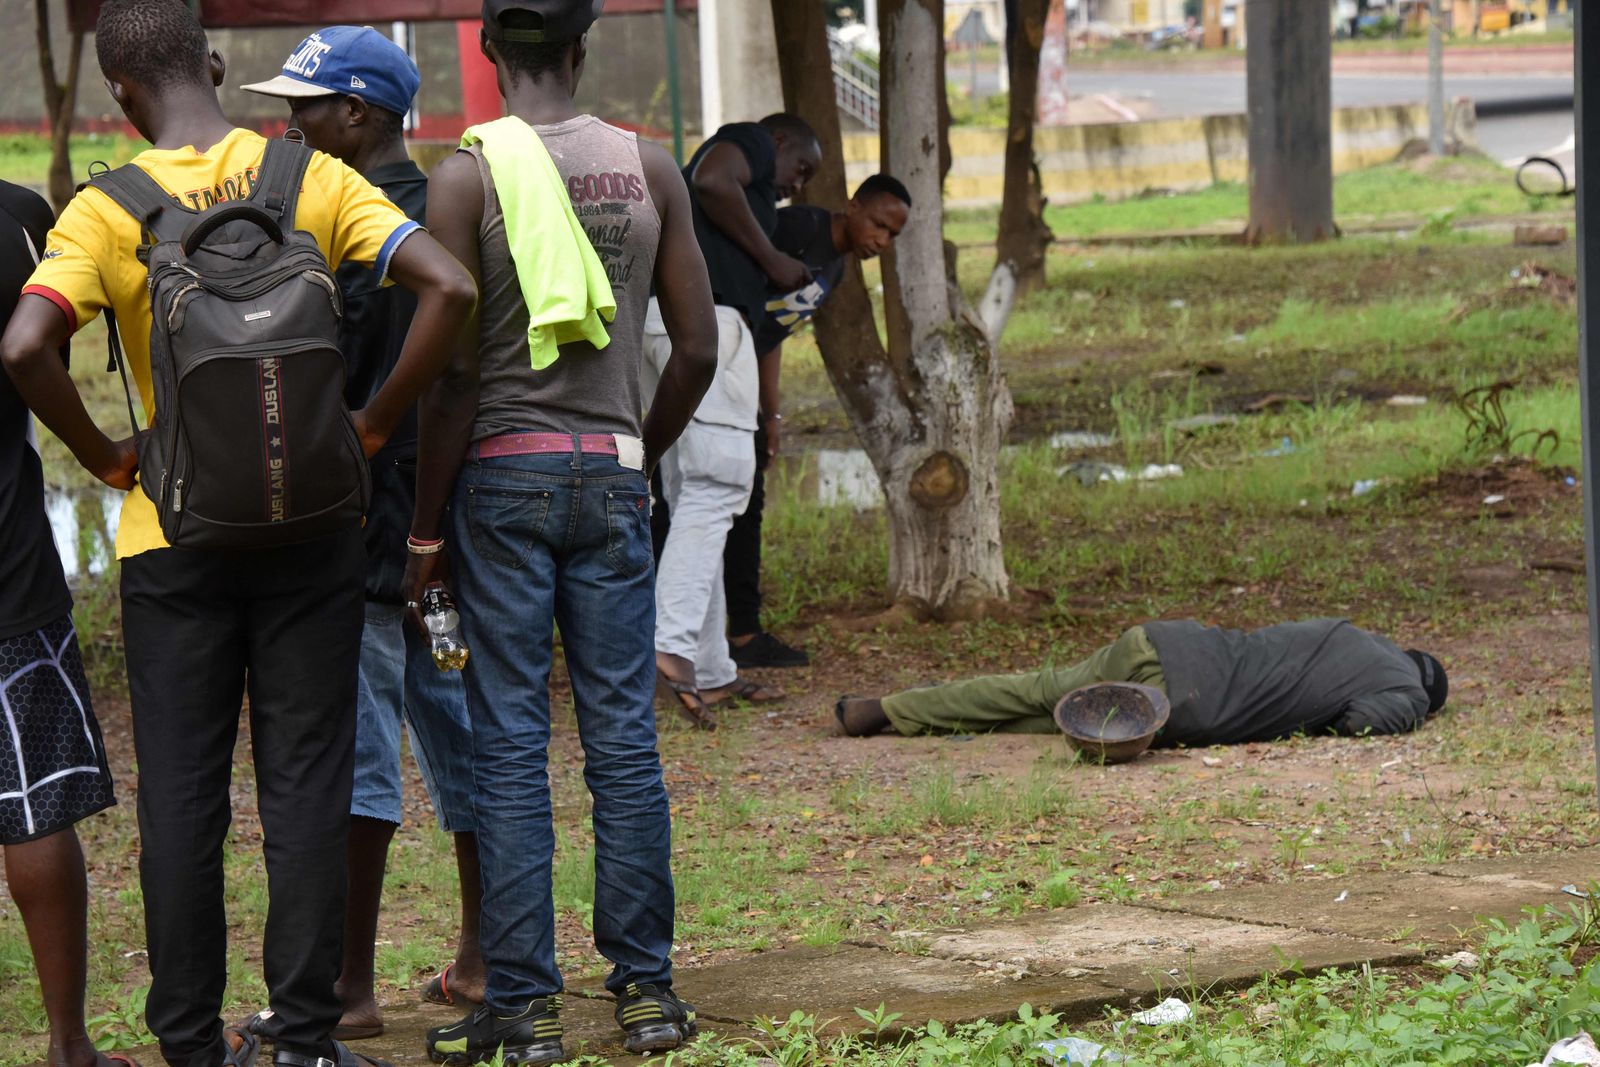 People look on at a corpse in the central neighbourhood of Kaloum in Conakry on September 5, 2021 after sustainable gunfire was heard. - Gunfire was heard in Conkary in the morning and troops were seen on the streets, witnesses told AFP. There was no immediate explanation for the incidents in Conakry's Kaloum peninsula, where the presidency, various institutions and offices are located. (Photo by CELLOU BINANI / AFP) - AFP